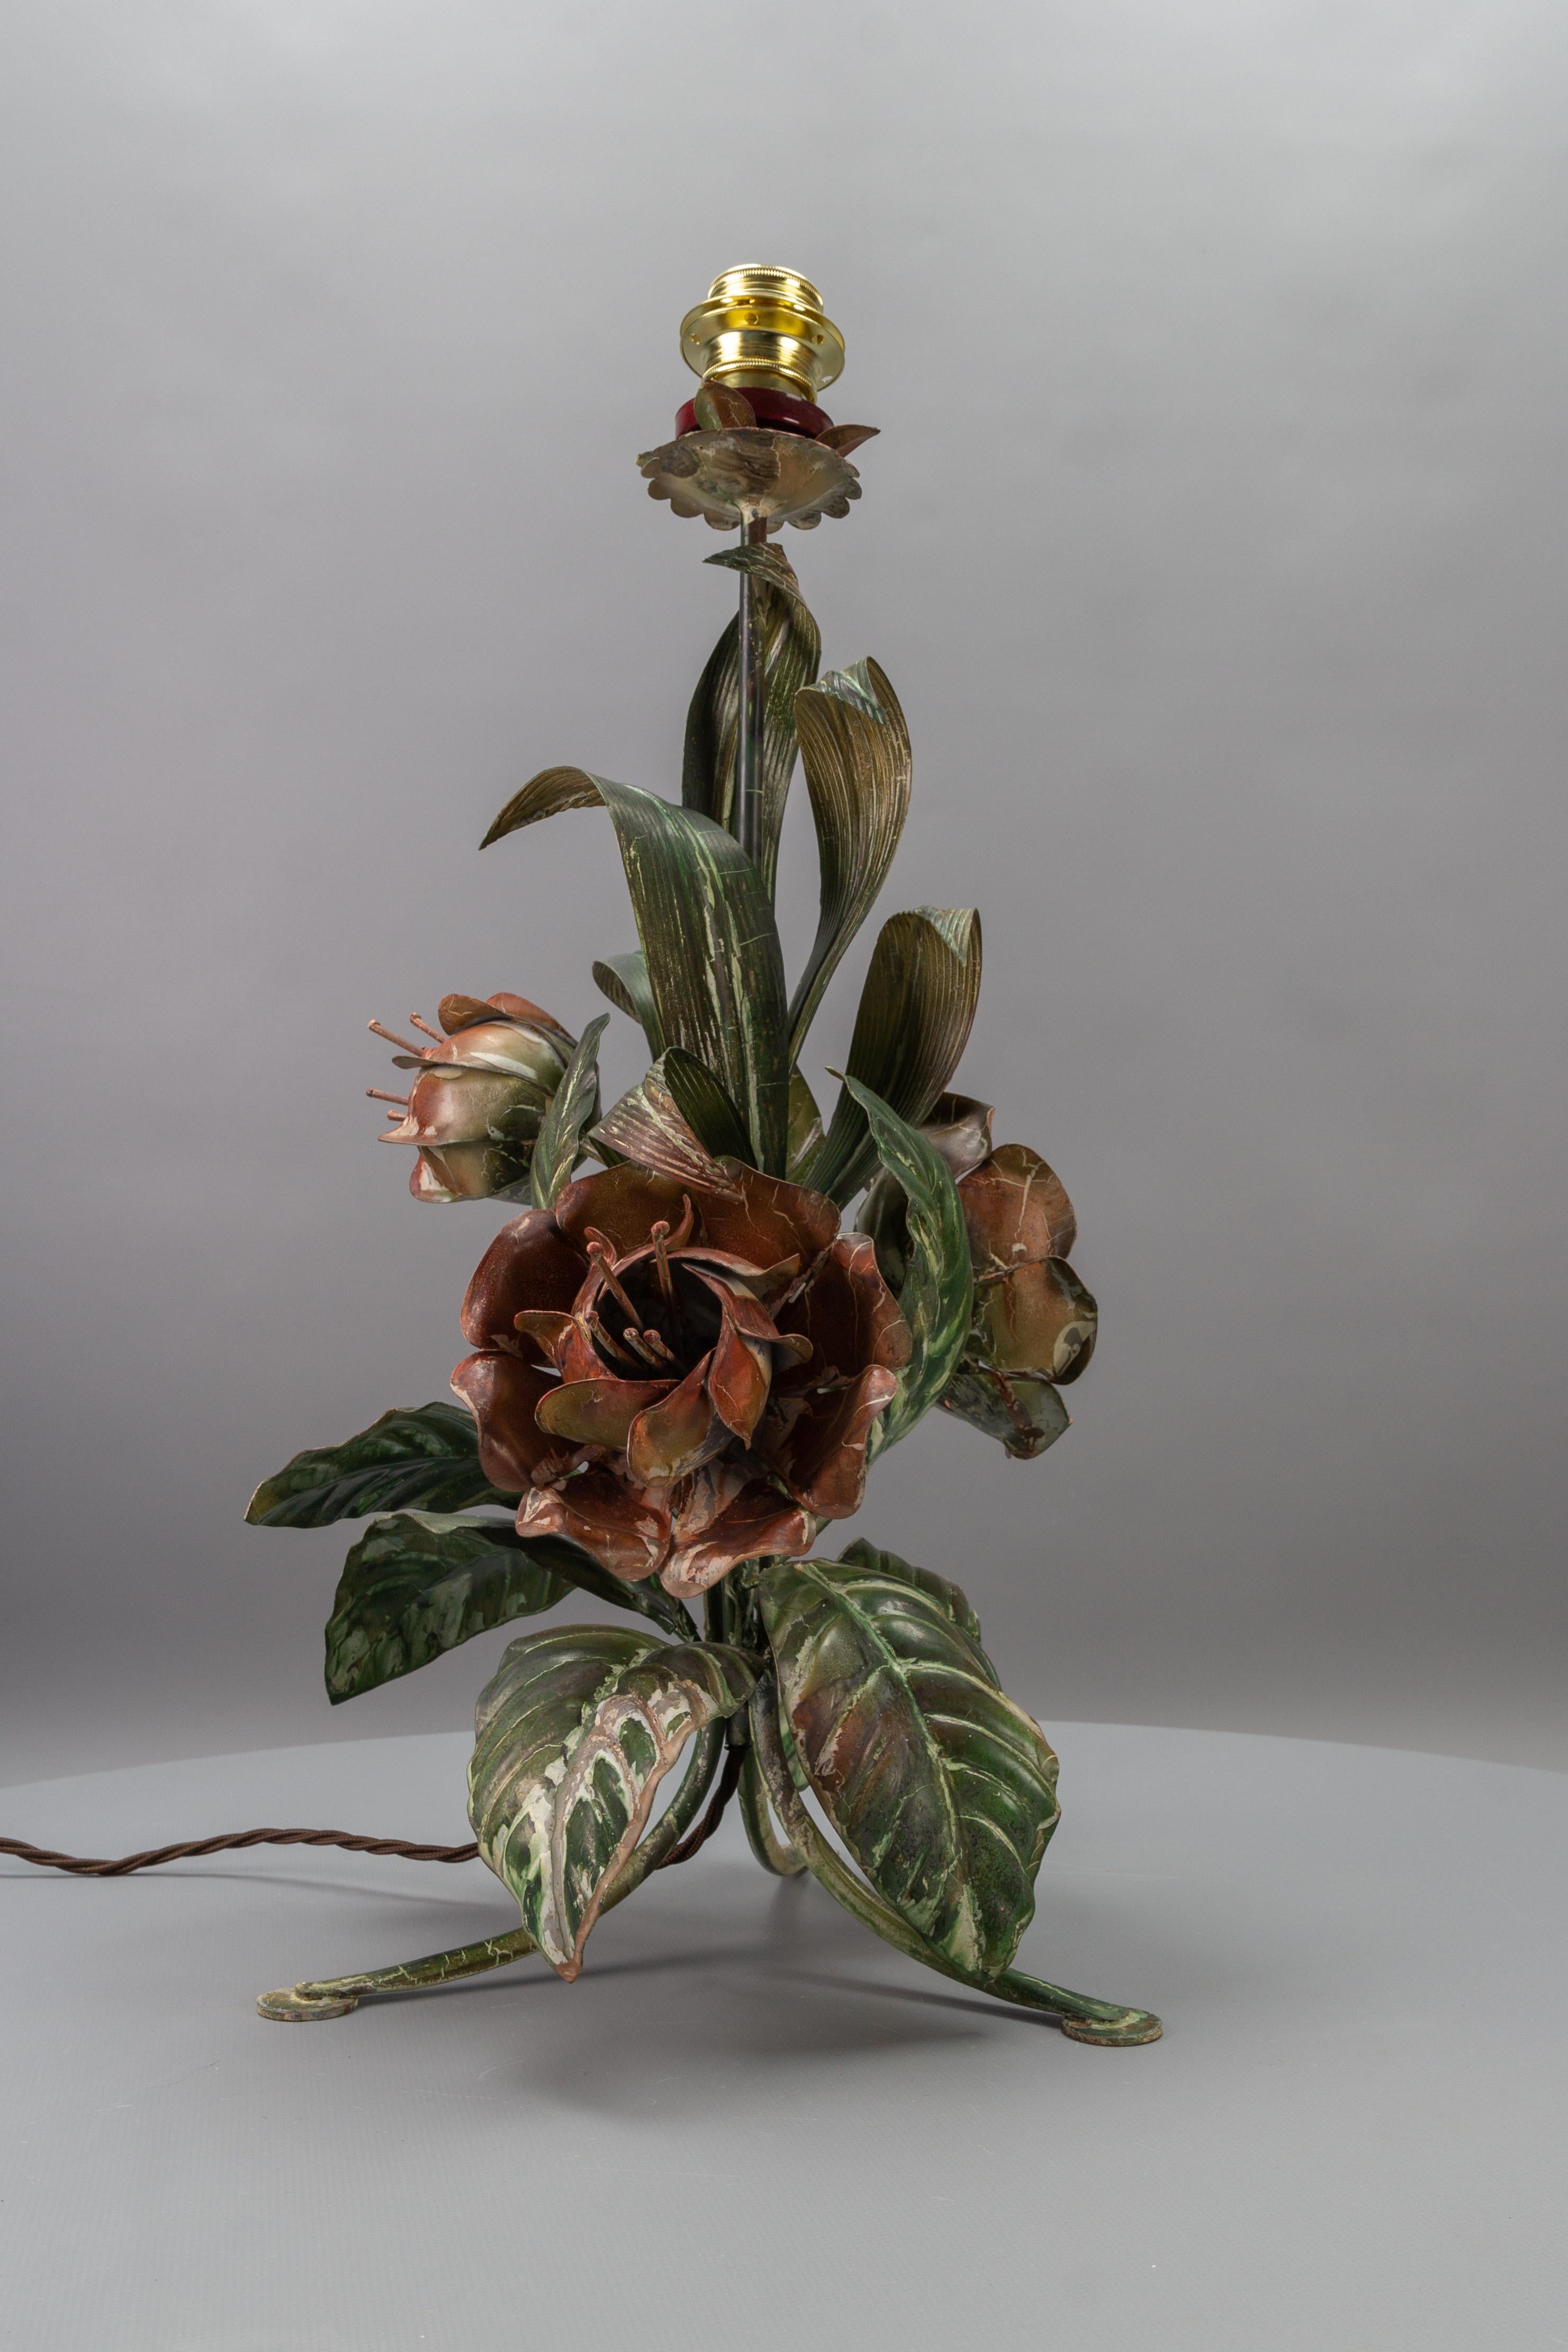 Hollywood Regency style green and red painted toleware flower-shaped table Lamp, Germany, circa the 1970s.
This impressive Hollywood Regency-style table lamp base is a stunning piece made of hand-painted metal in the shape of large flowers - three